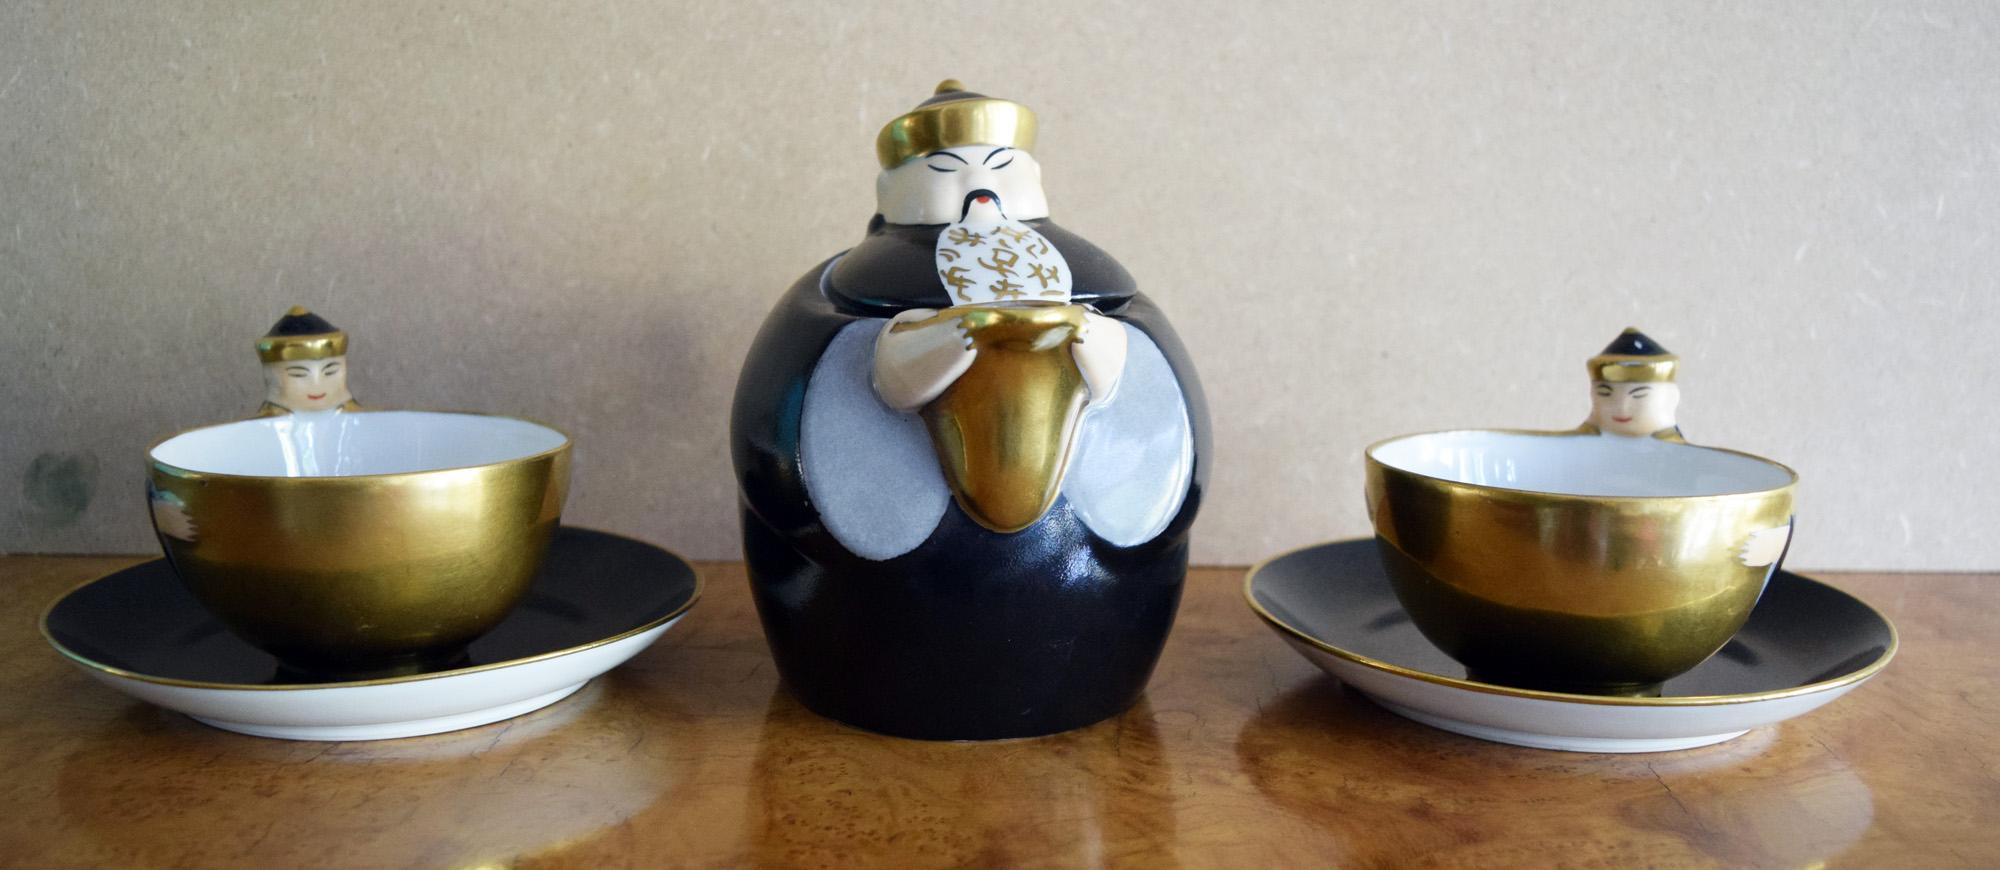 Robj porcelaine Chinese character bachelor tea set In Good Condition For Sale In London, GB